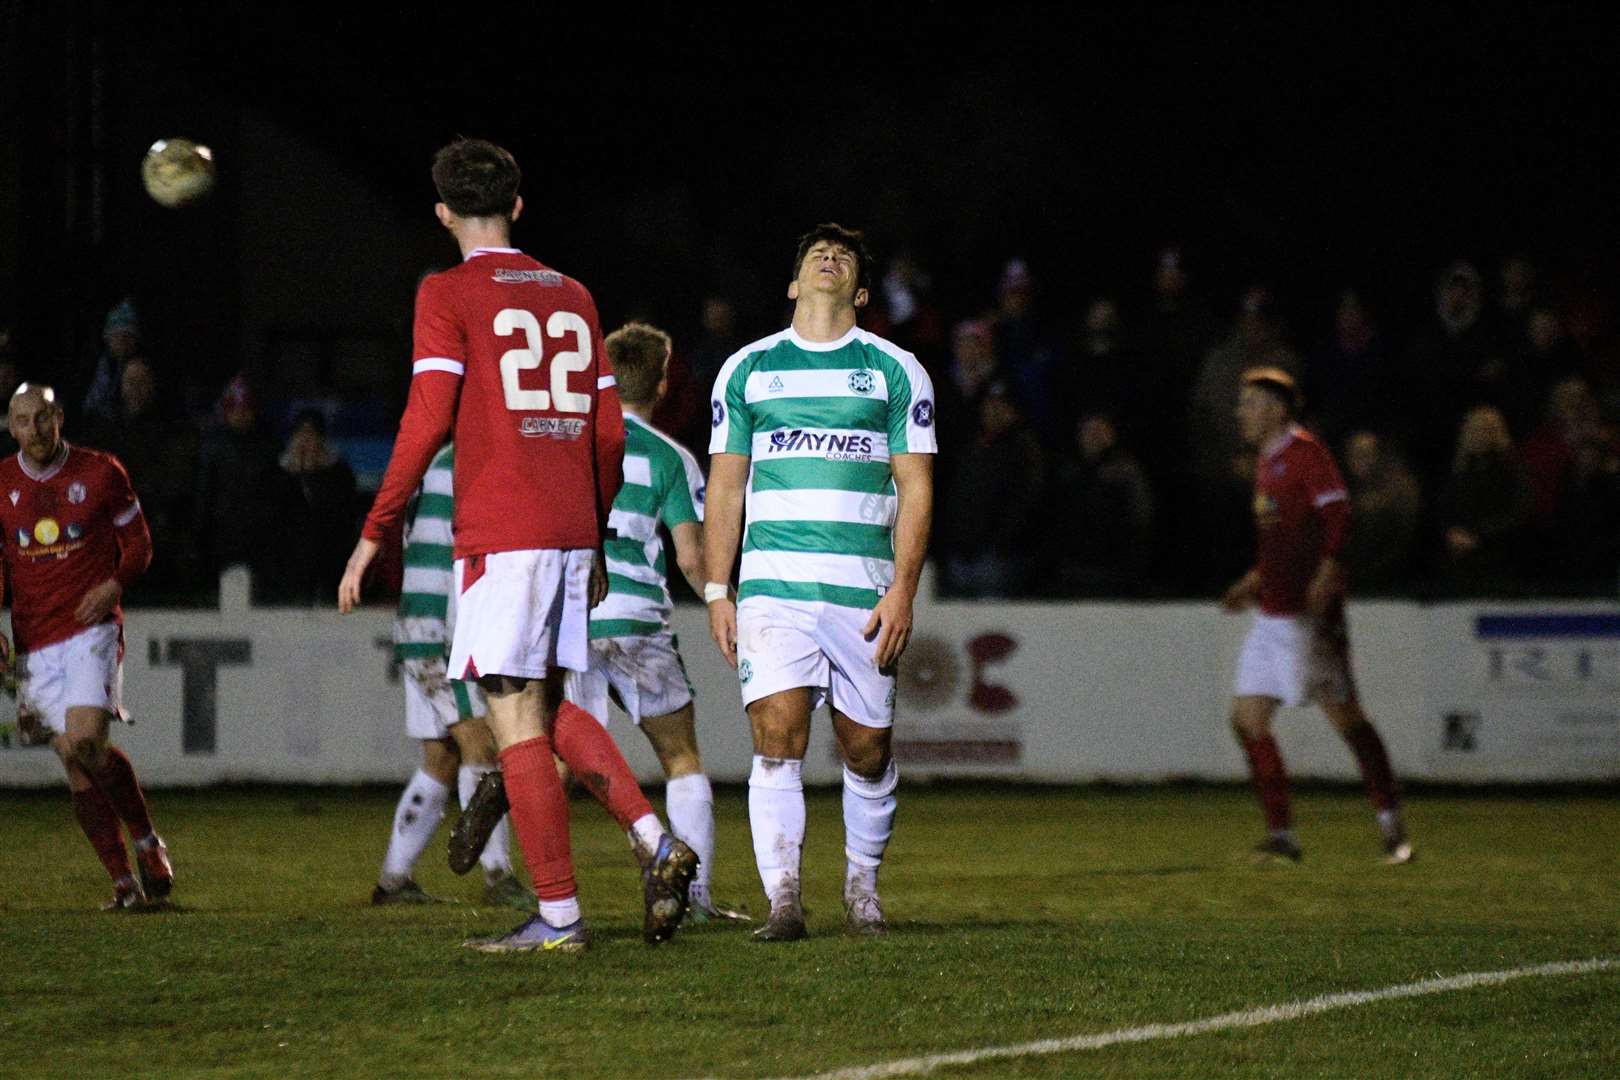 Despair for Buckie's Max Barry after another chance goes abegging. Picture: Daniel Forsyth